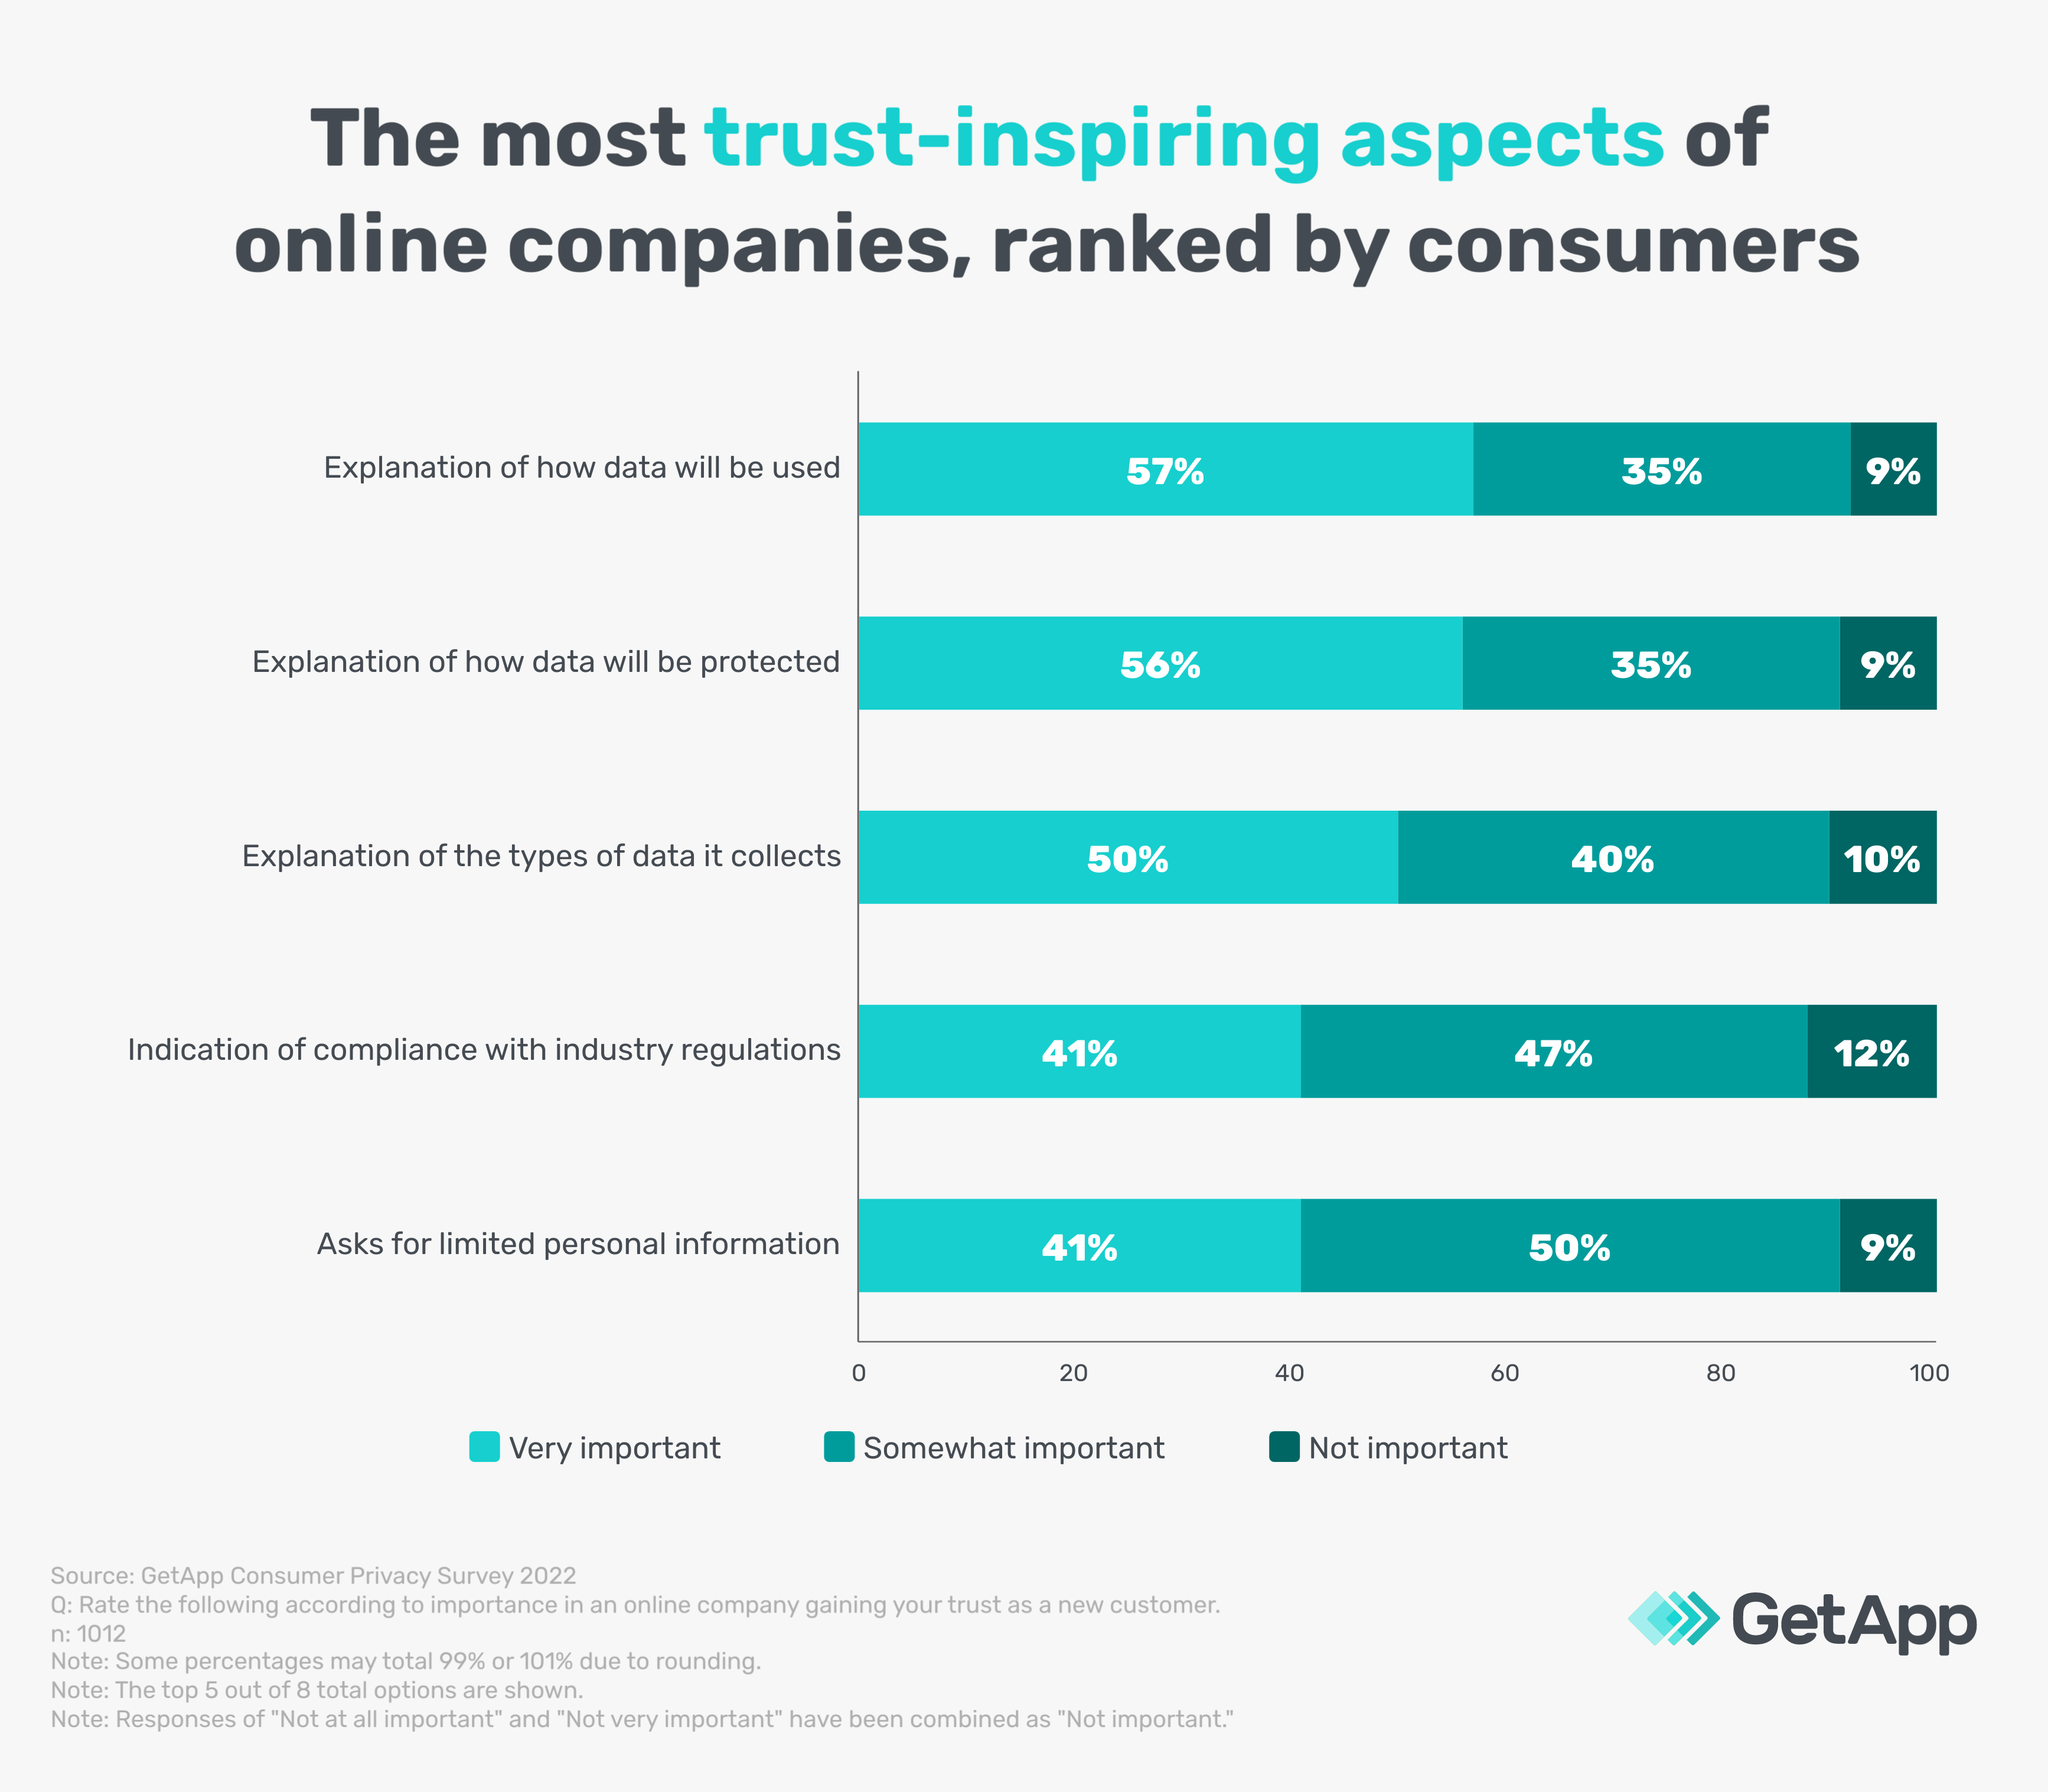 consumer preferences around online privacy and trustworthy aspects of a company